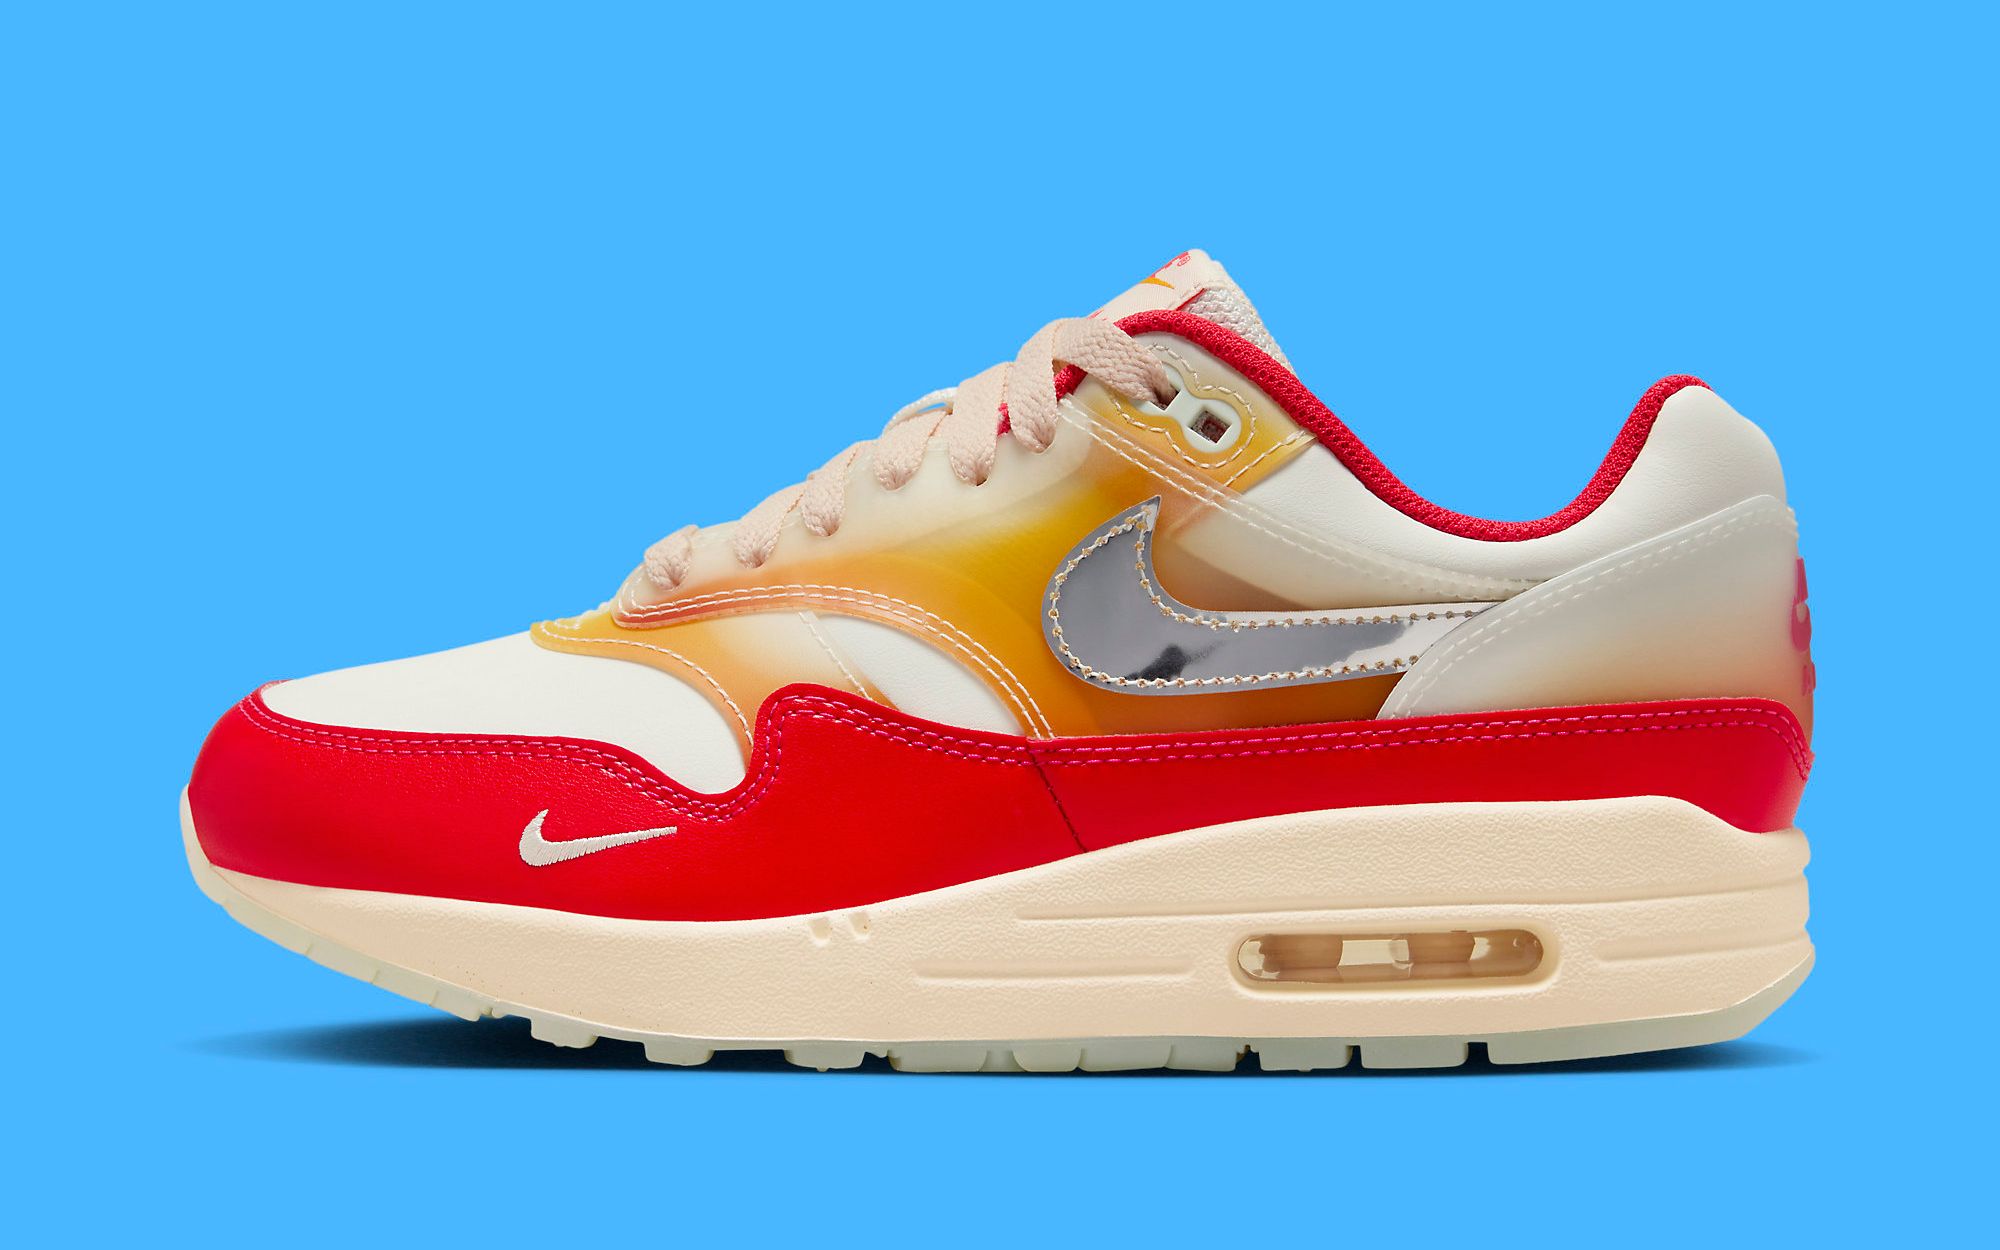 The Nike Air Max 1 “Soft Vinyl” is Inspired by Collectible Vinyl